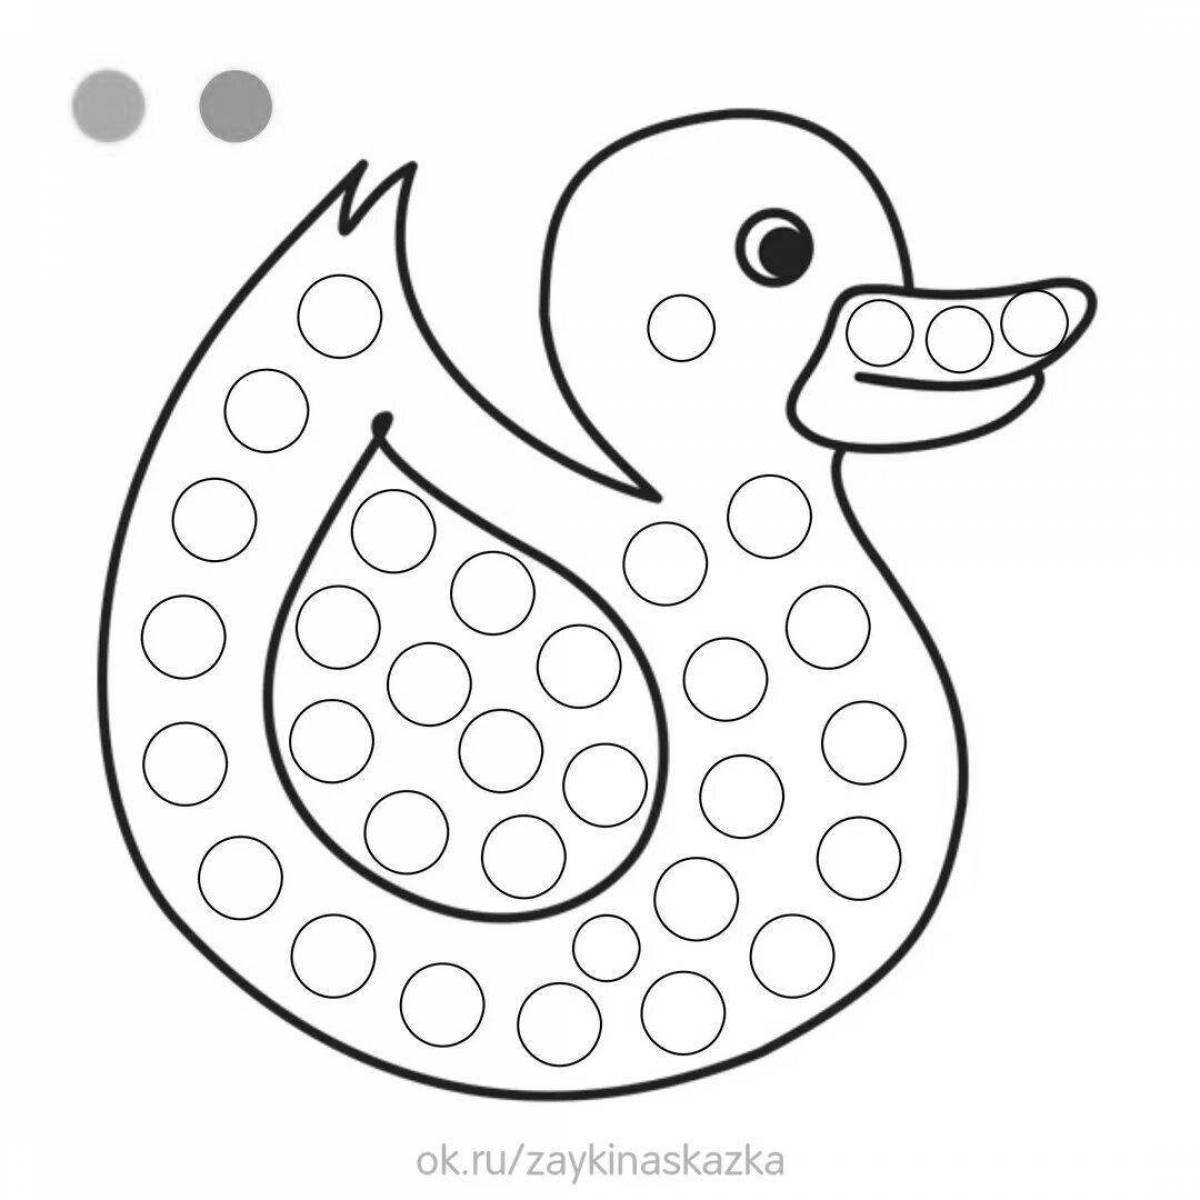 Bright Dymkovo duck coloring book for kids